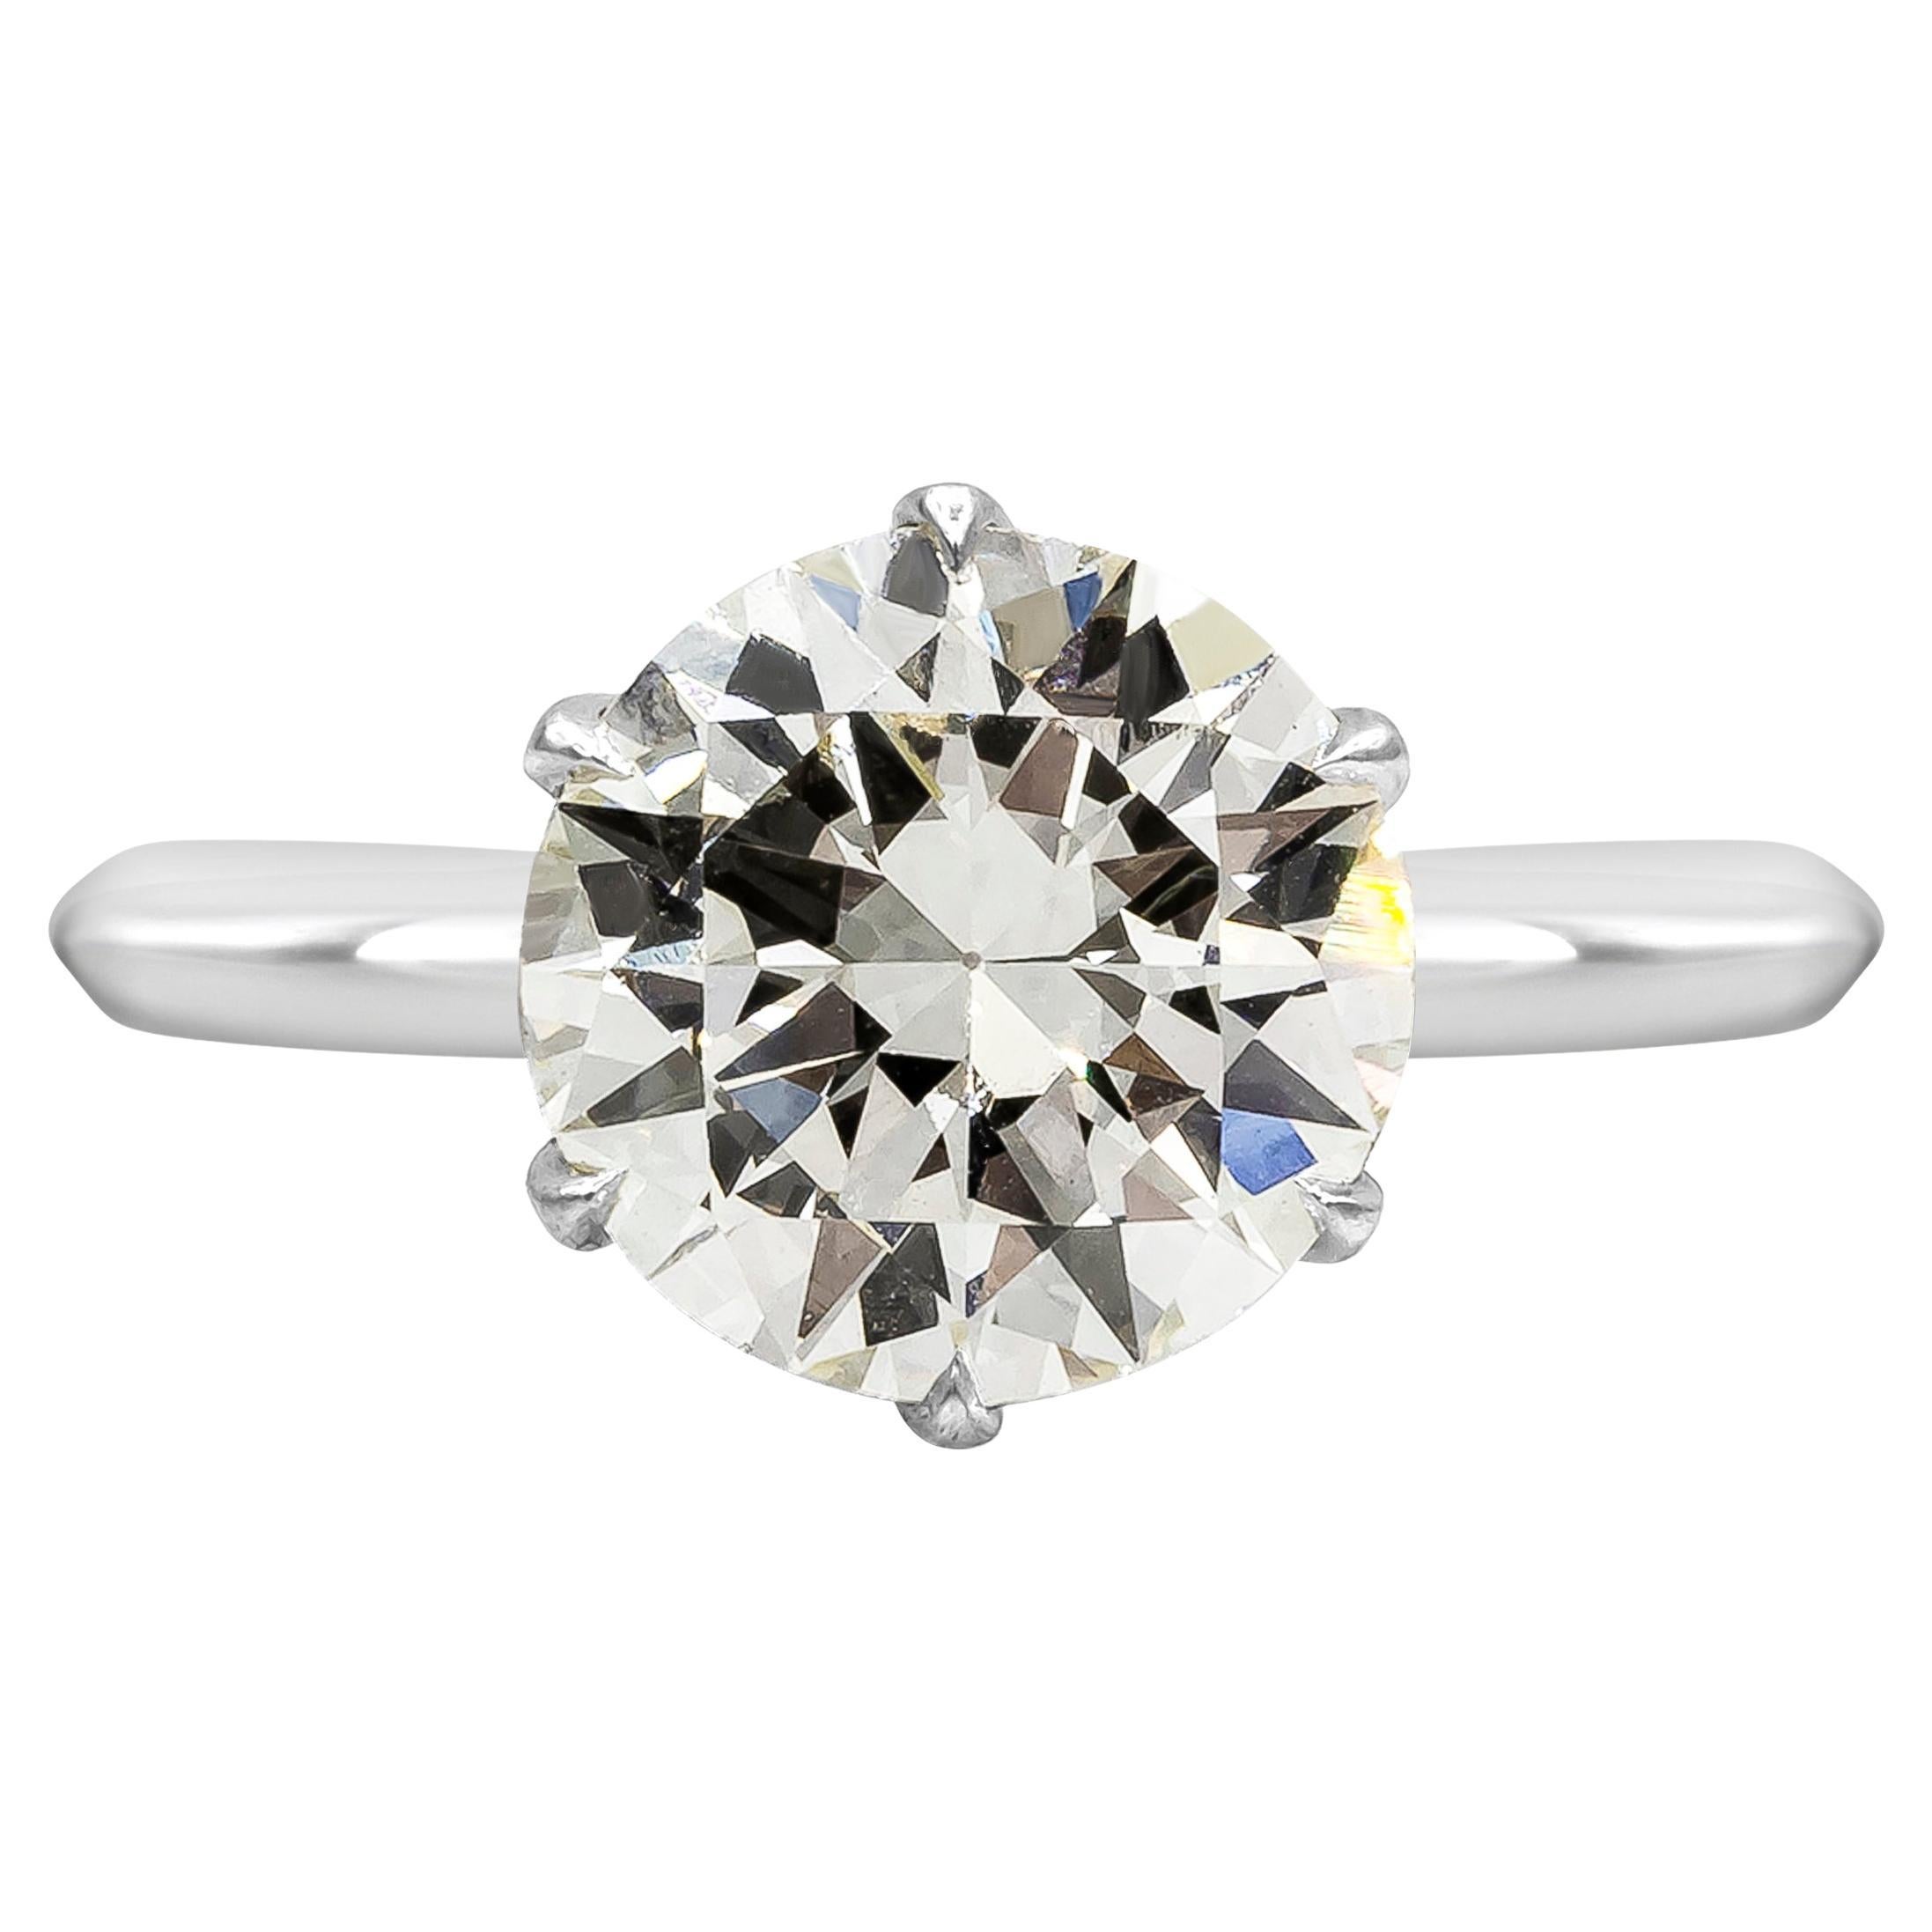 GIA Certified 2.51 Carats Round Brilliant Cut Diamond Solitaire Engagement Ring